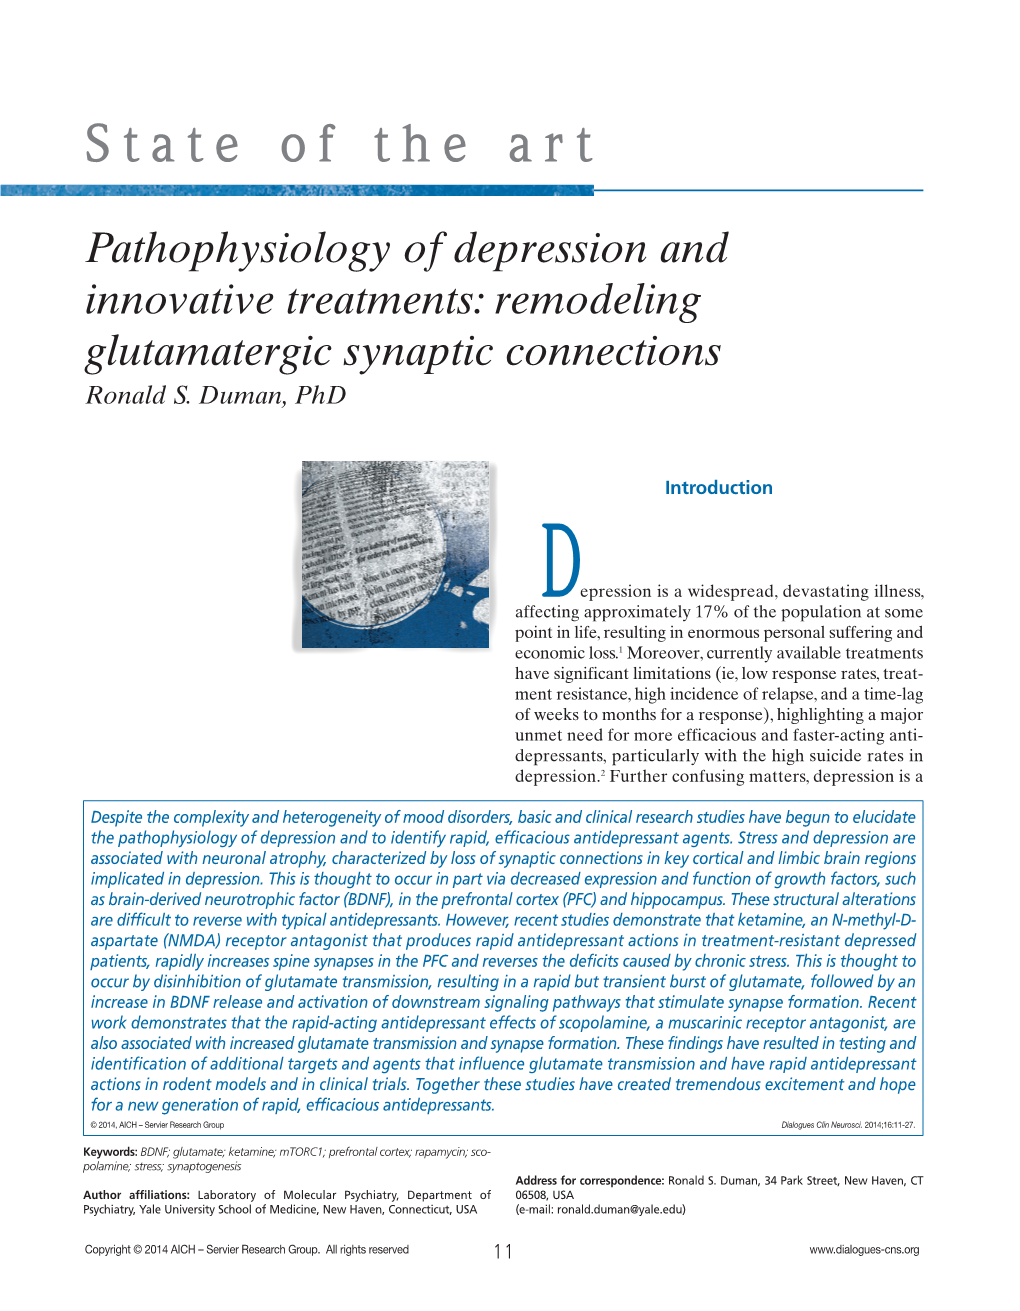 Pathophysiology of Depression and Innovative Treatments: Remodeling Glutamatergic Synaptic Connections Ronald S